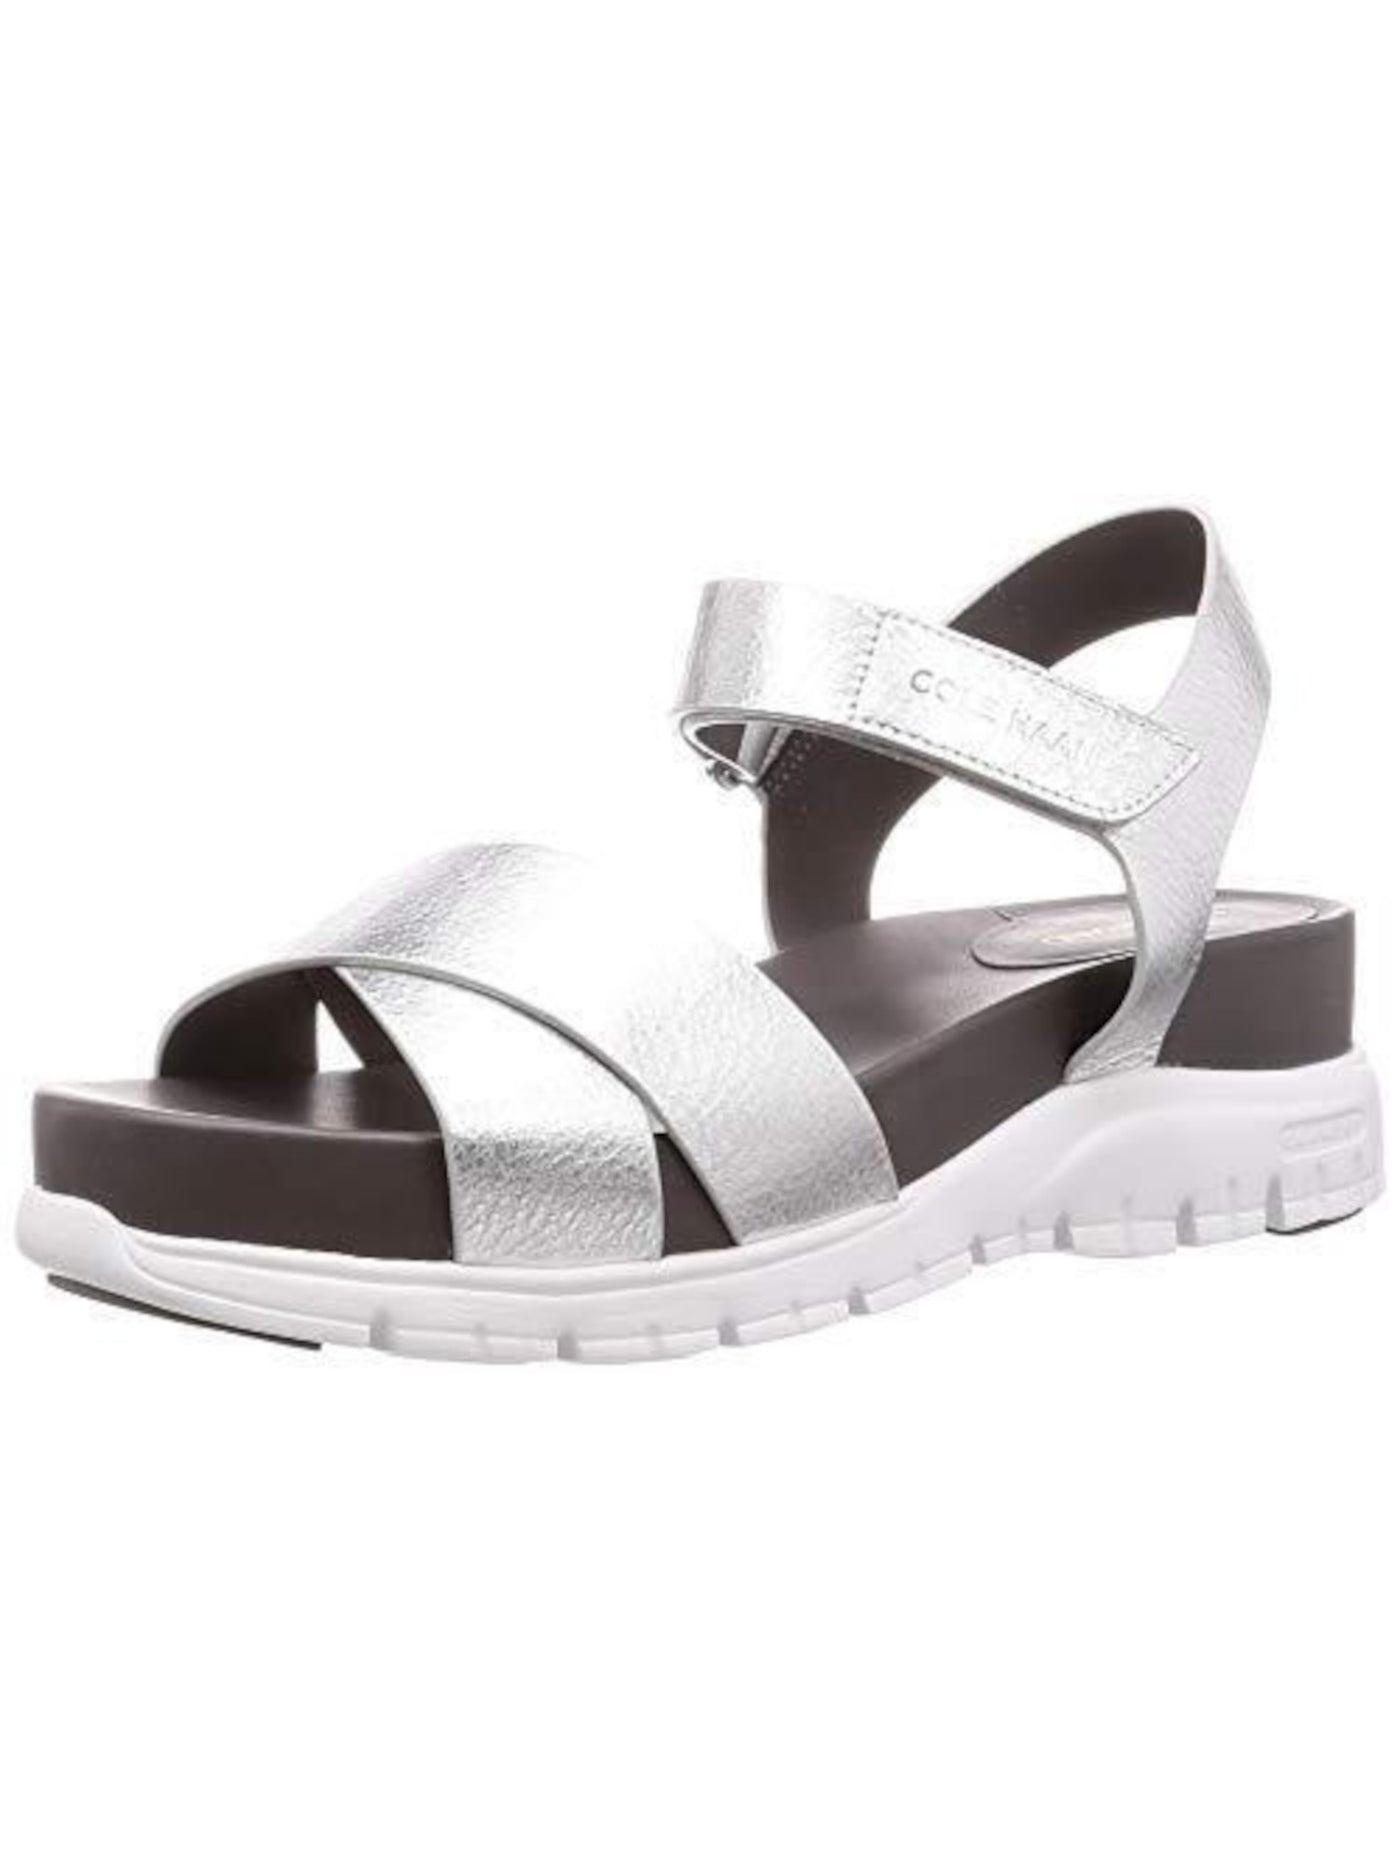 COLE HAAN Womens Silver Ankle Strap Padded Zerogrand Ii Round Toe Leather Slingback Sandal 6 B